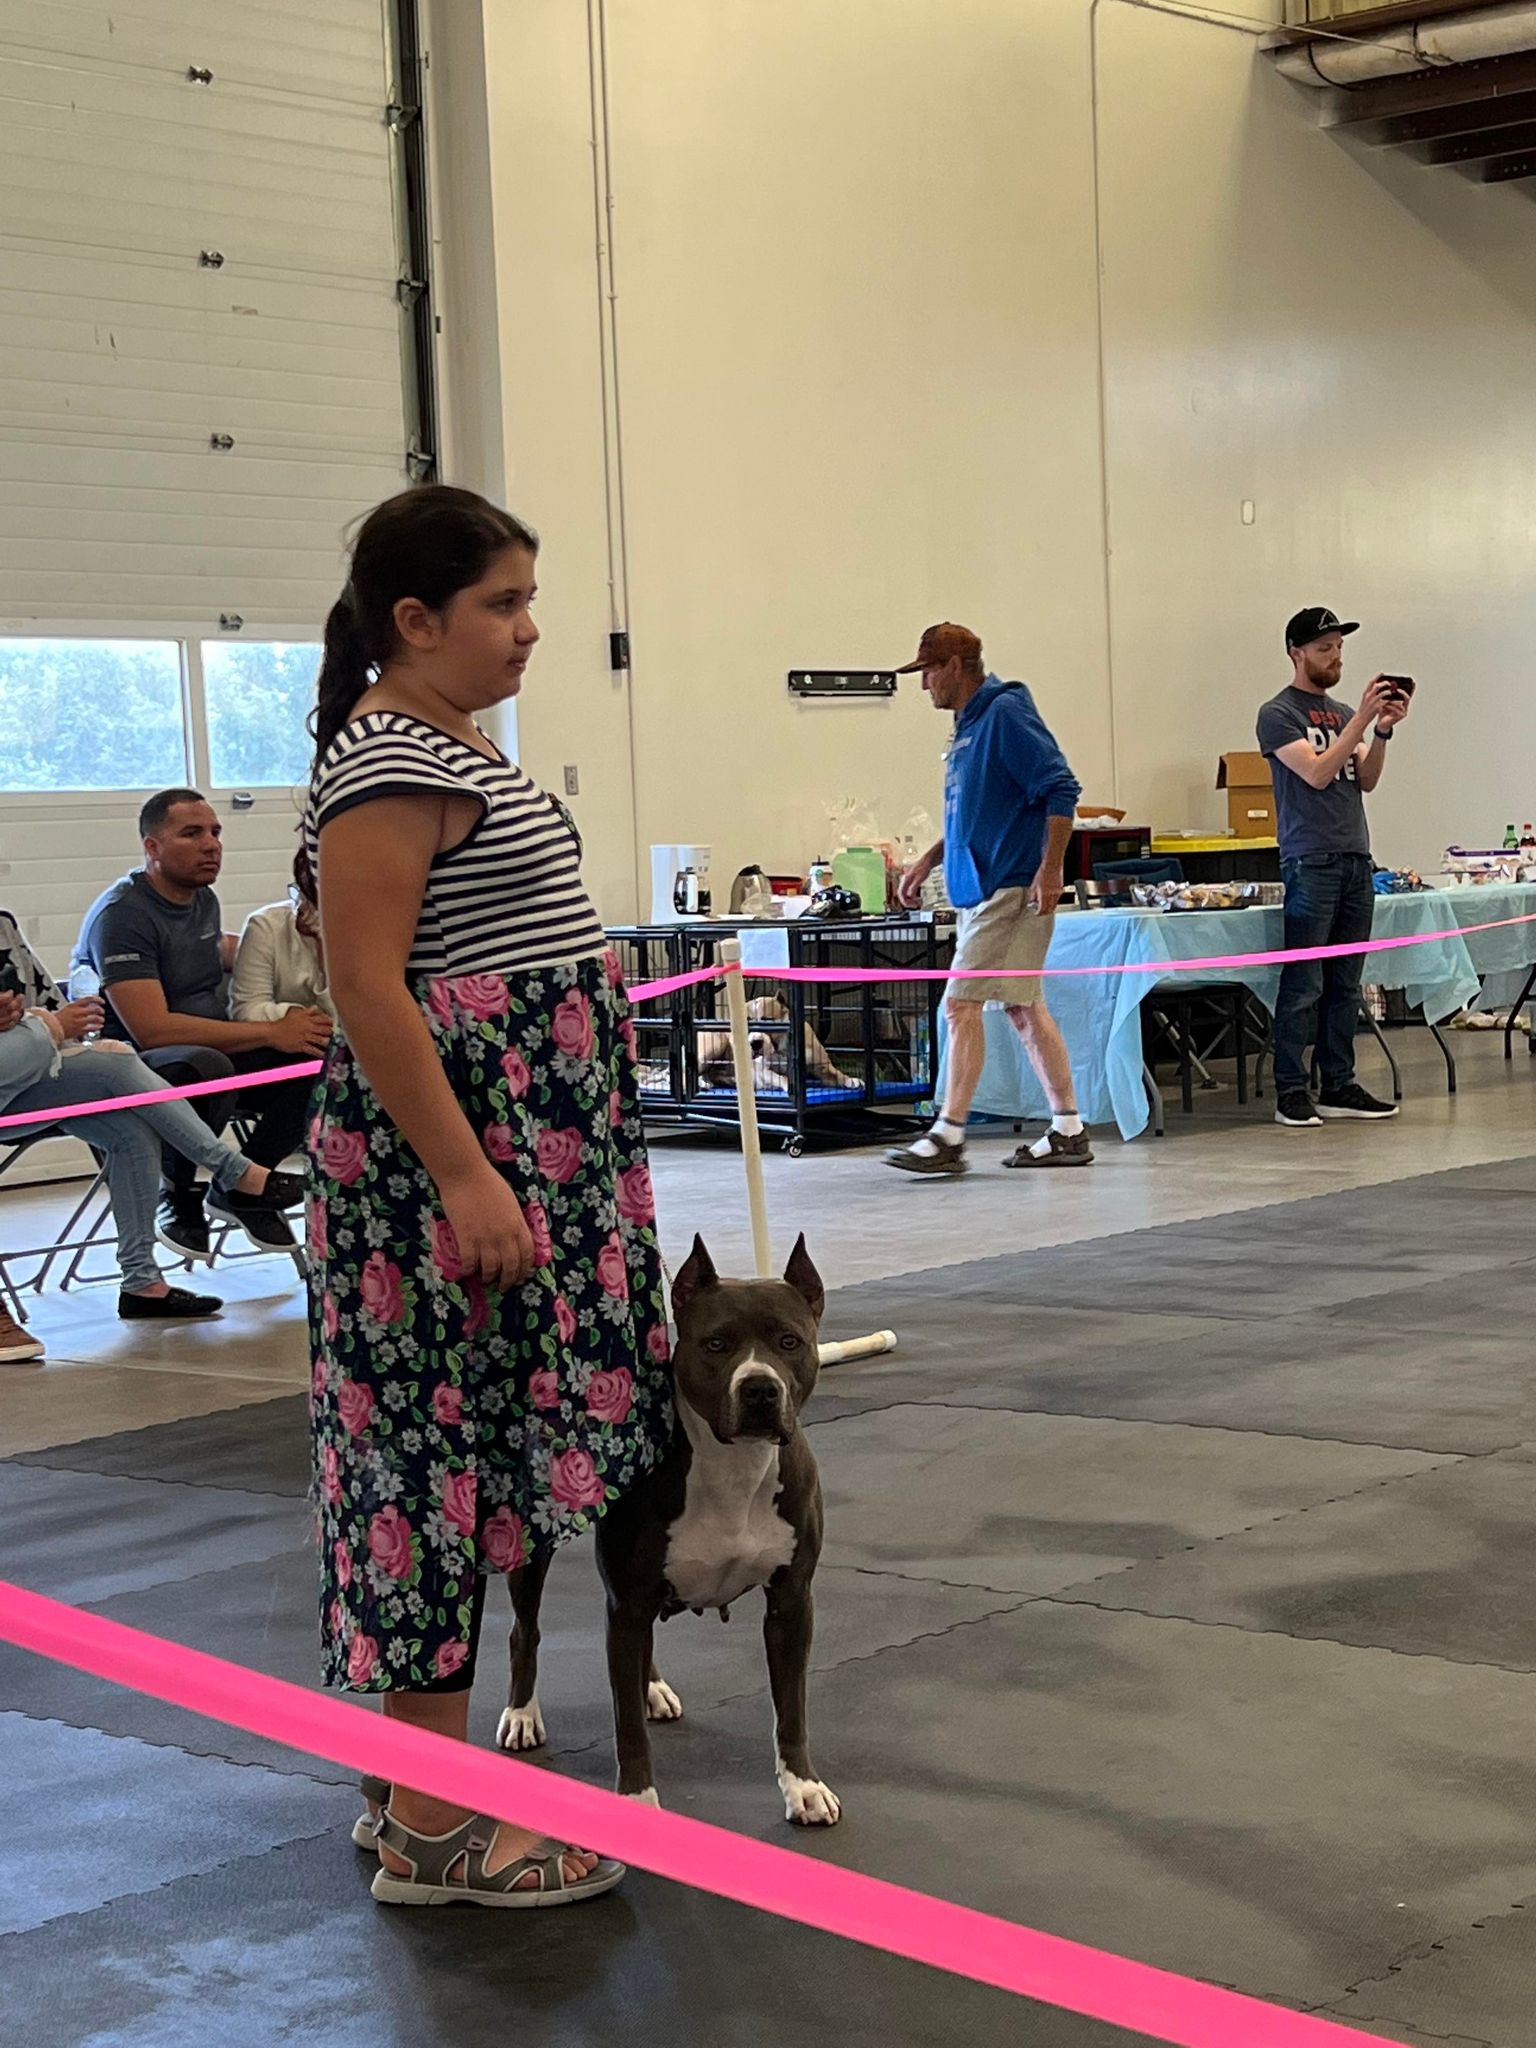 Dog shows are great for kids